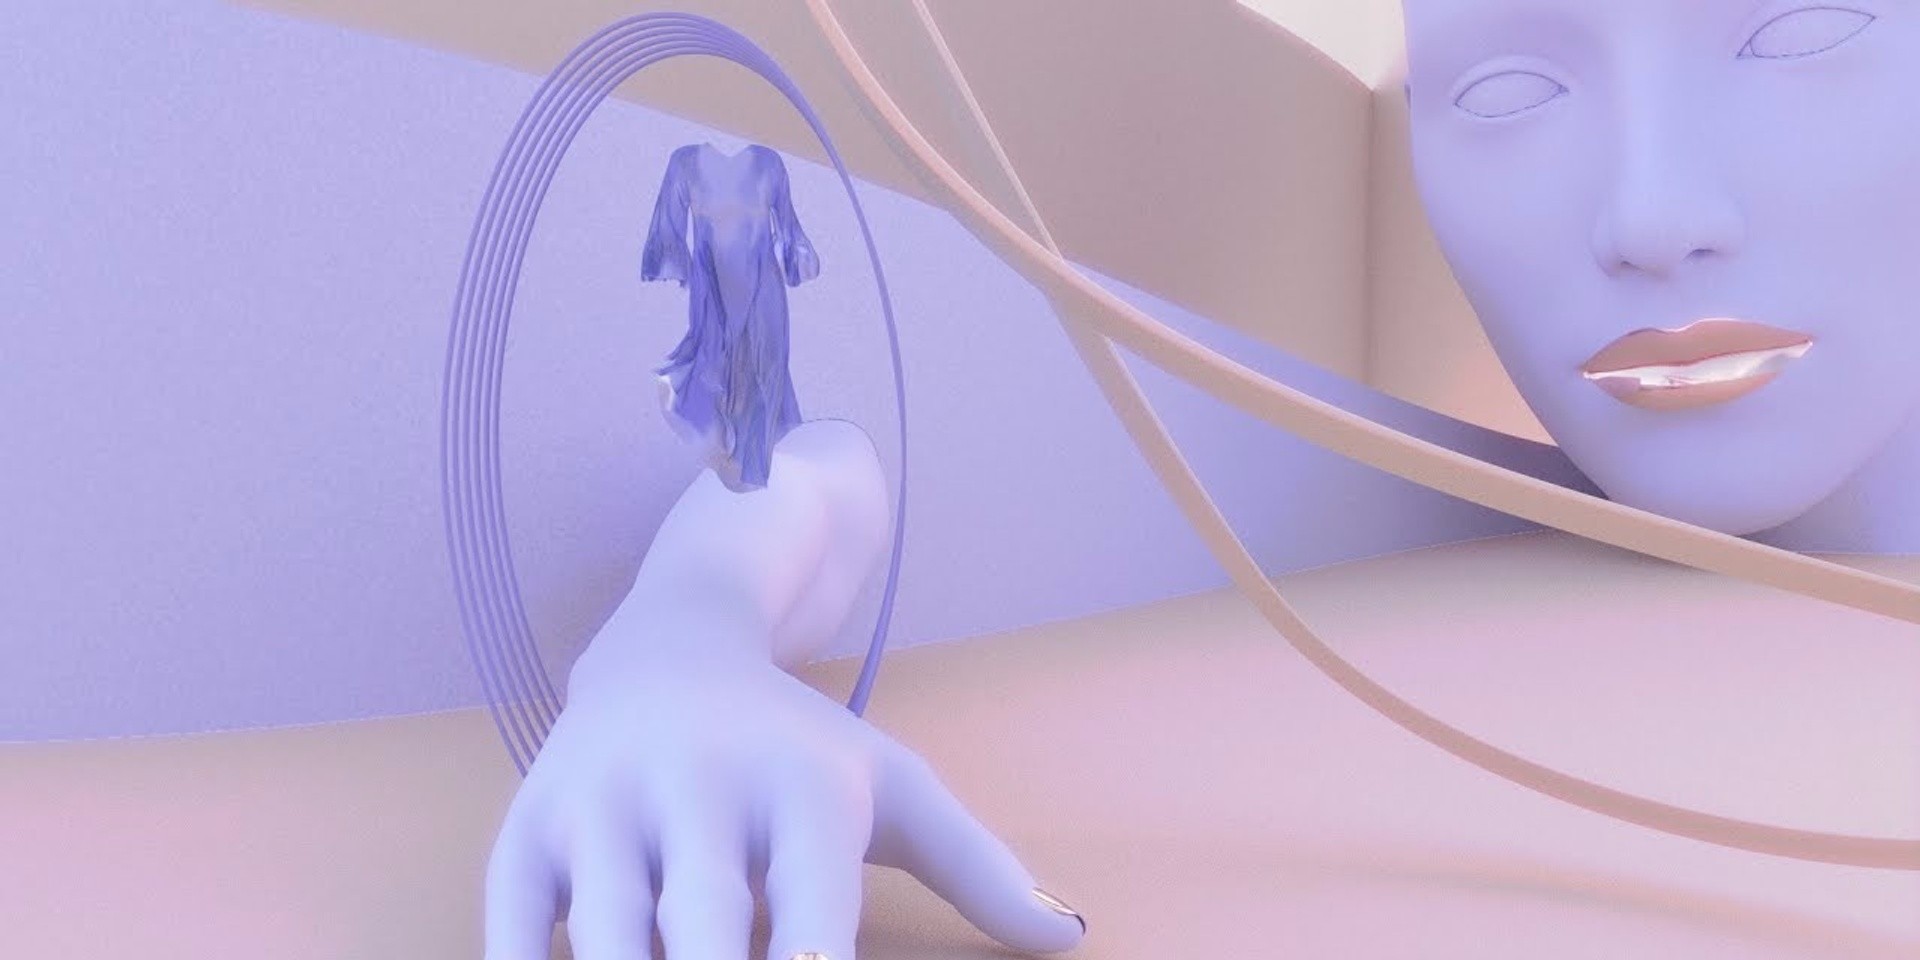 Renowned fashion animator LS528 crafts ultra-surreal visuals for The Analog Girl's brilliant new single, 'More Than You Know' — watch